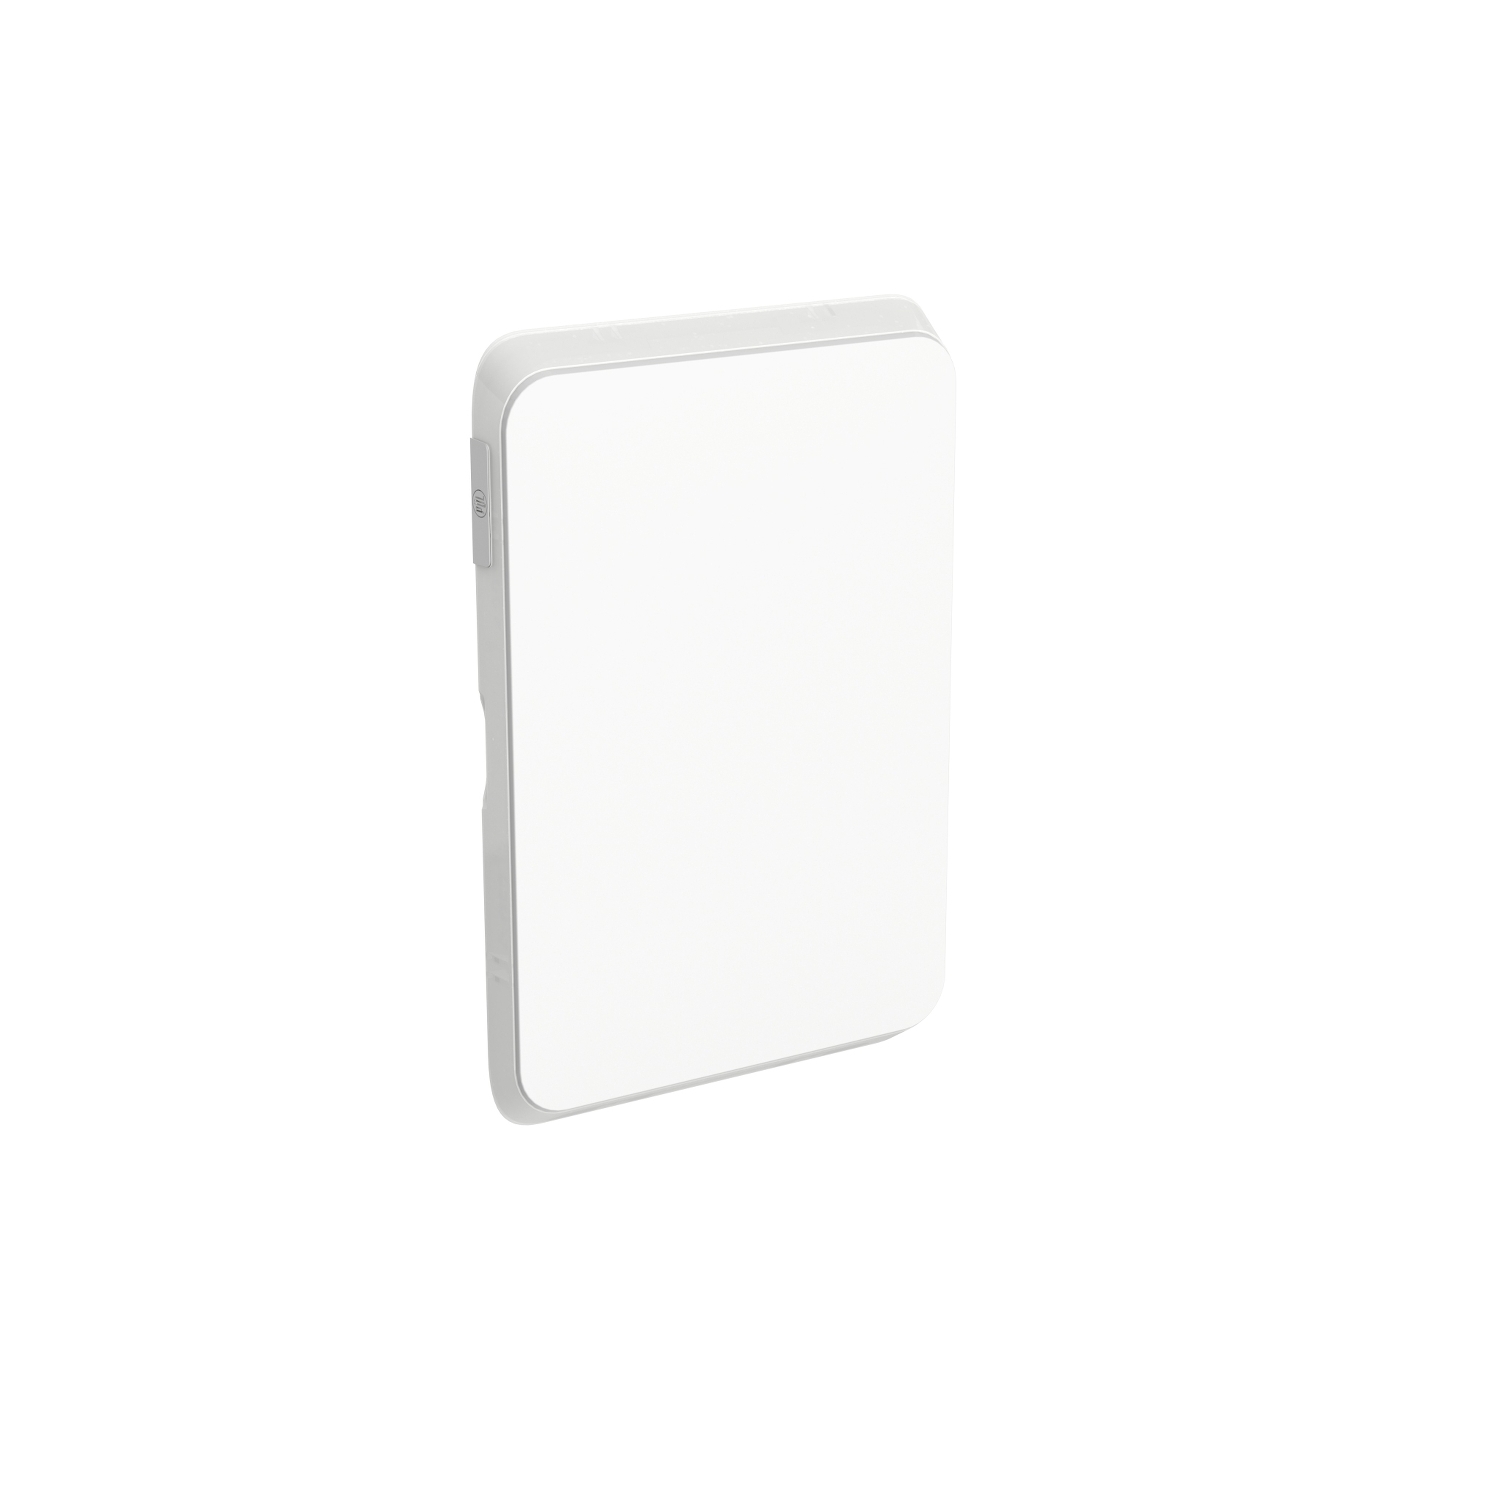 PDL350C-VW - PDL Iconic Cover Plate Blank Plate - Vivid White